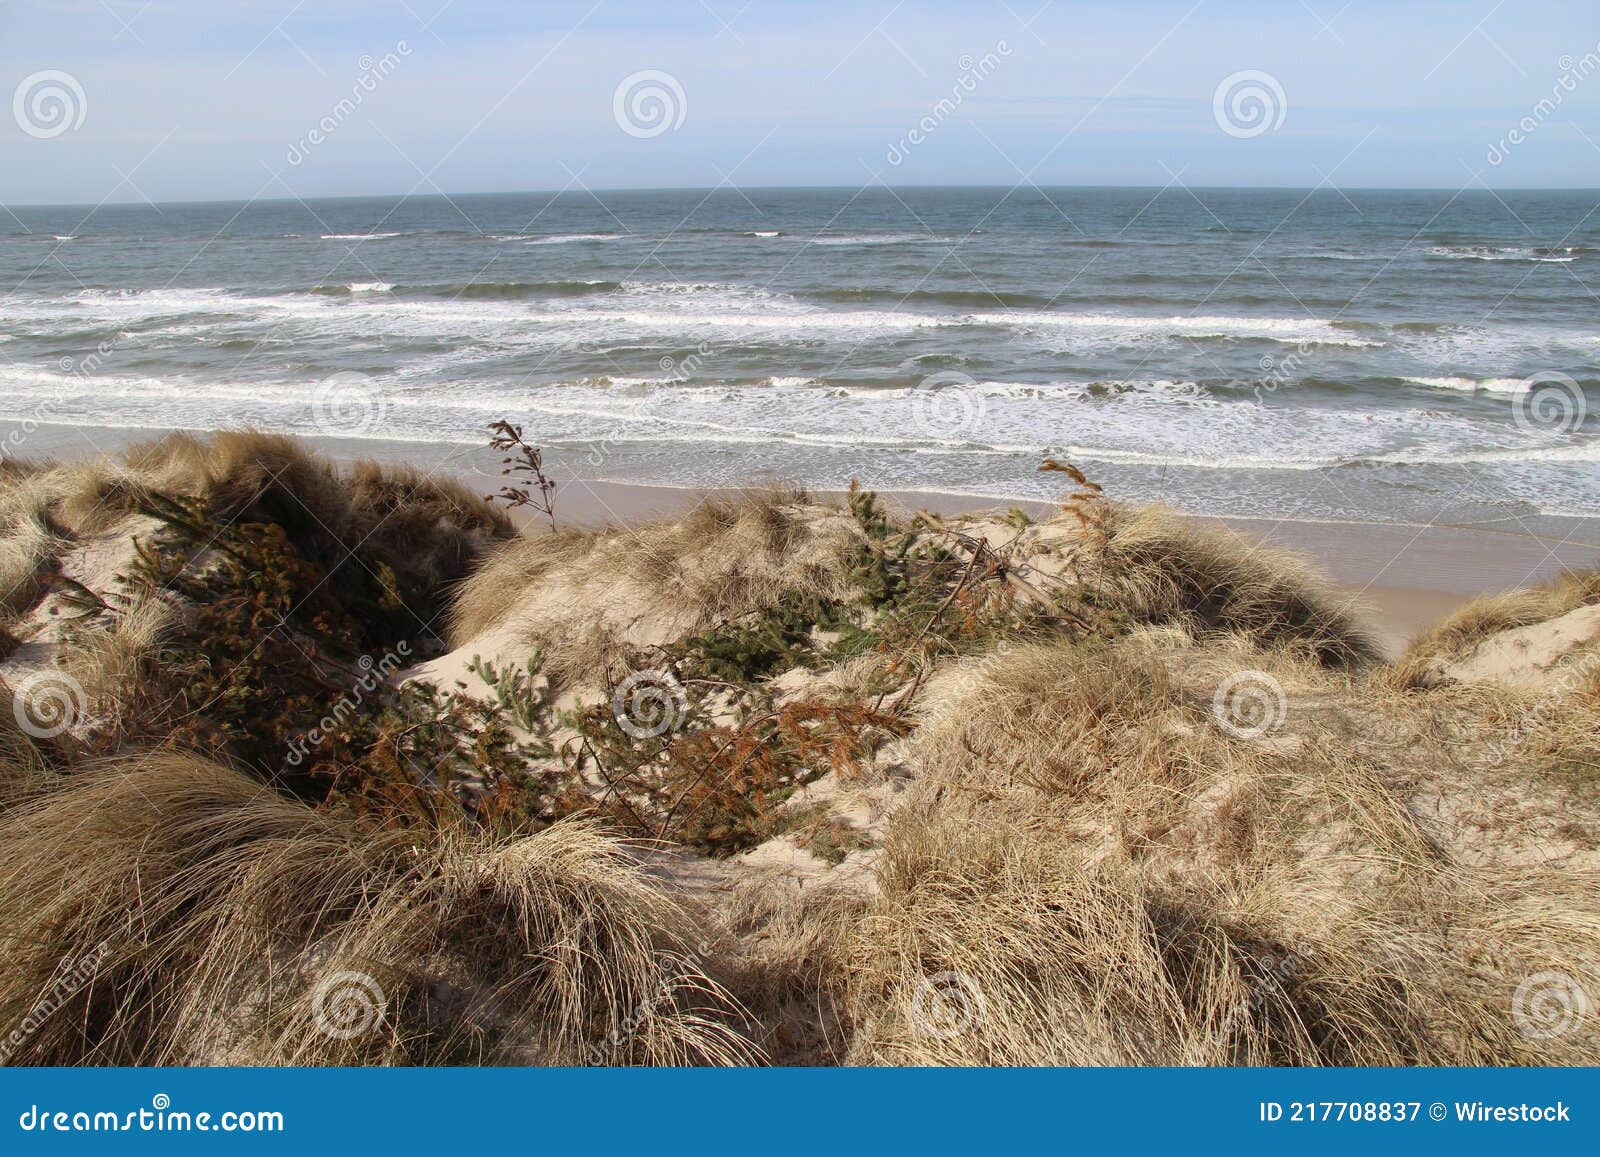 skille sig ud foretrækkes blik Beautiful View of Bushes and Dunes on the Beach Near Furreby, North Jutland,  Denmark Stock Image - Image of north, trees: 217708837